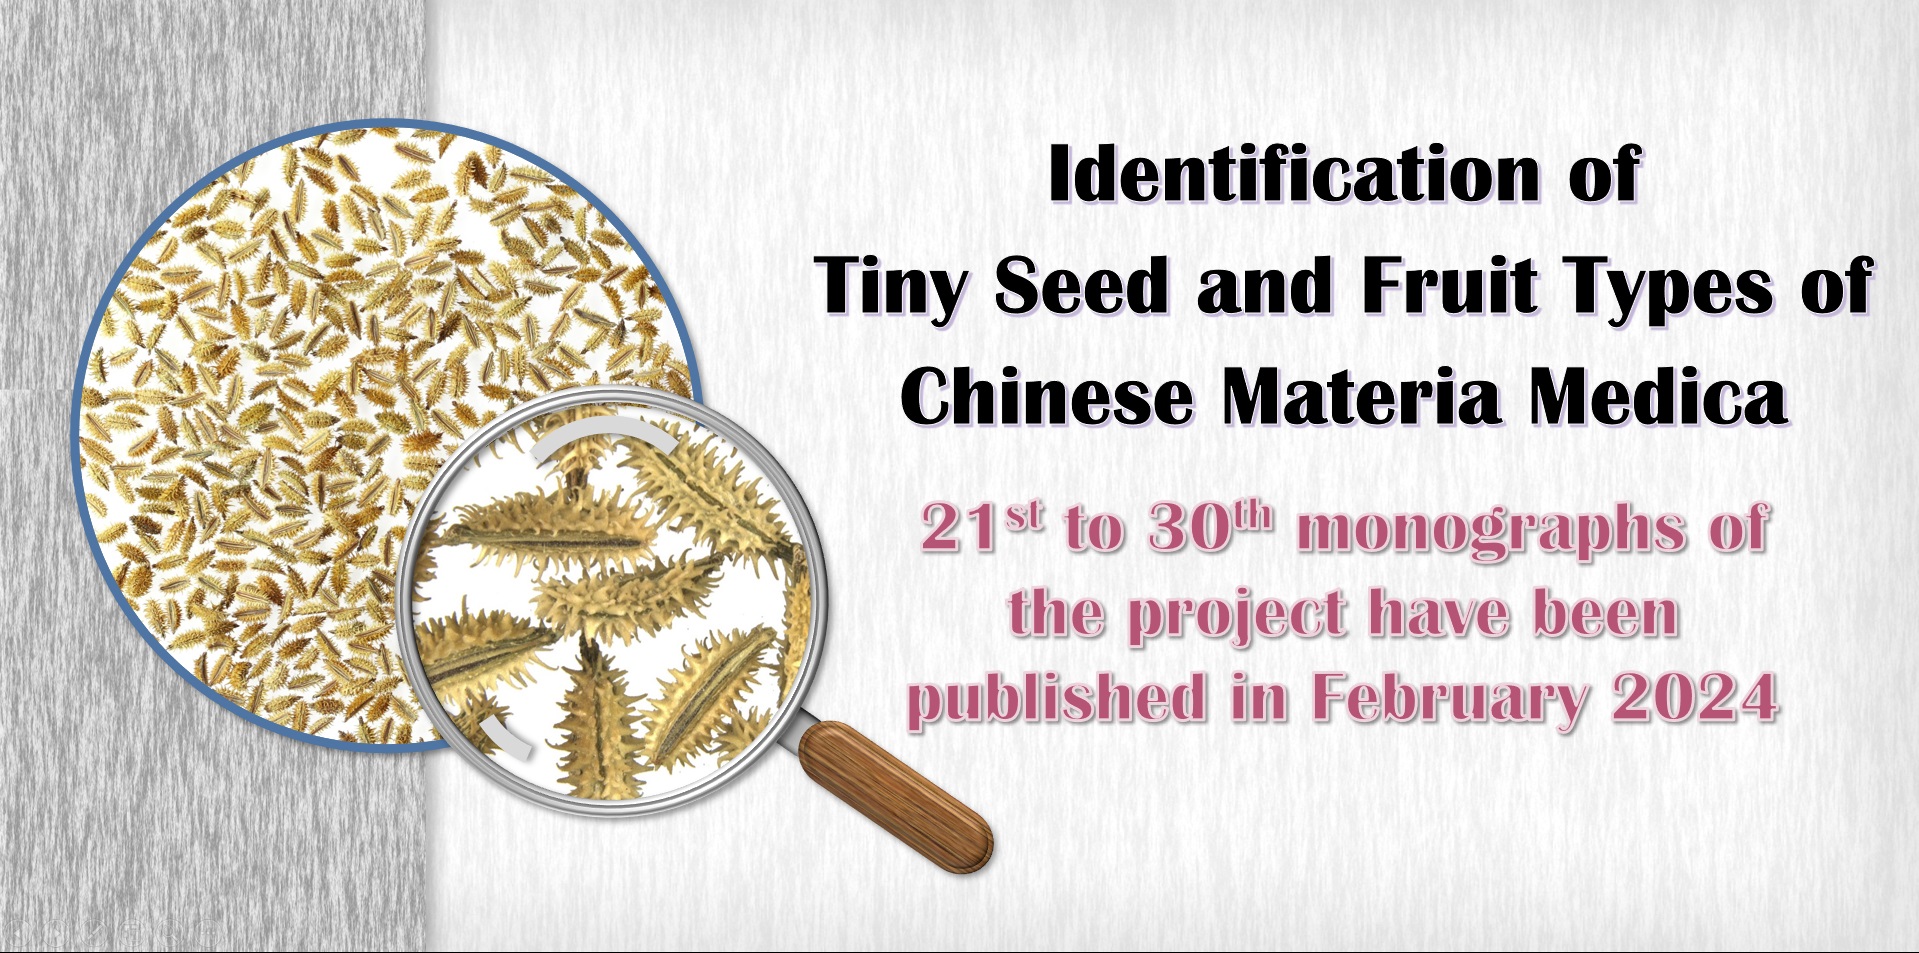 The 11th to 20th monographs of project “Identification of Tiny Seed and Fruit Types of Chinese Materia Medica” have been published in August 2023